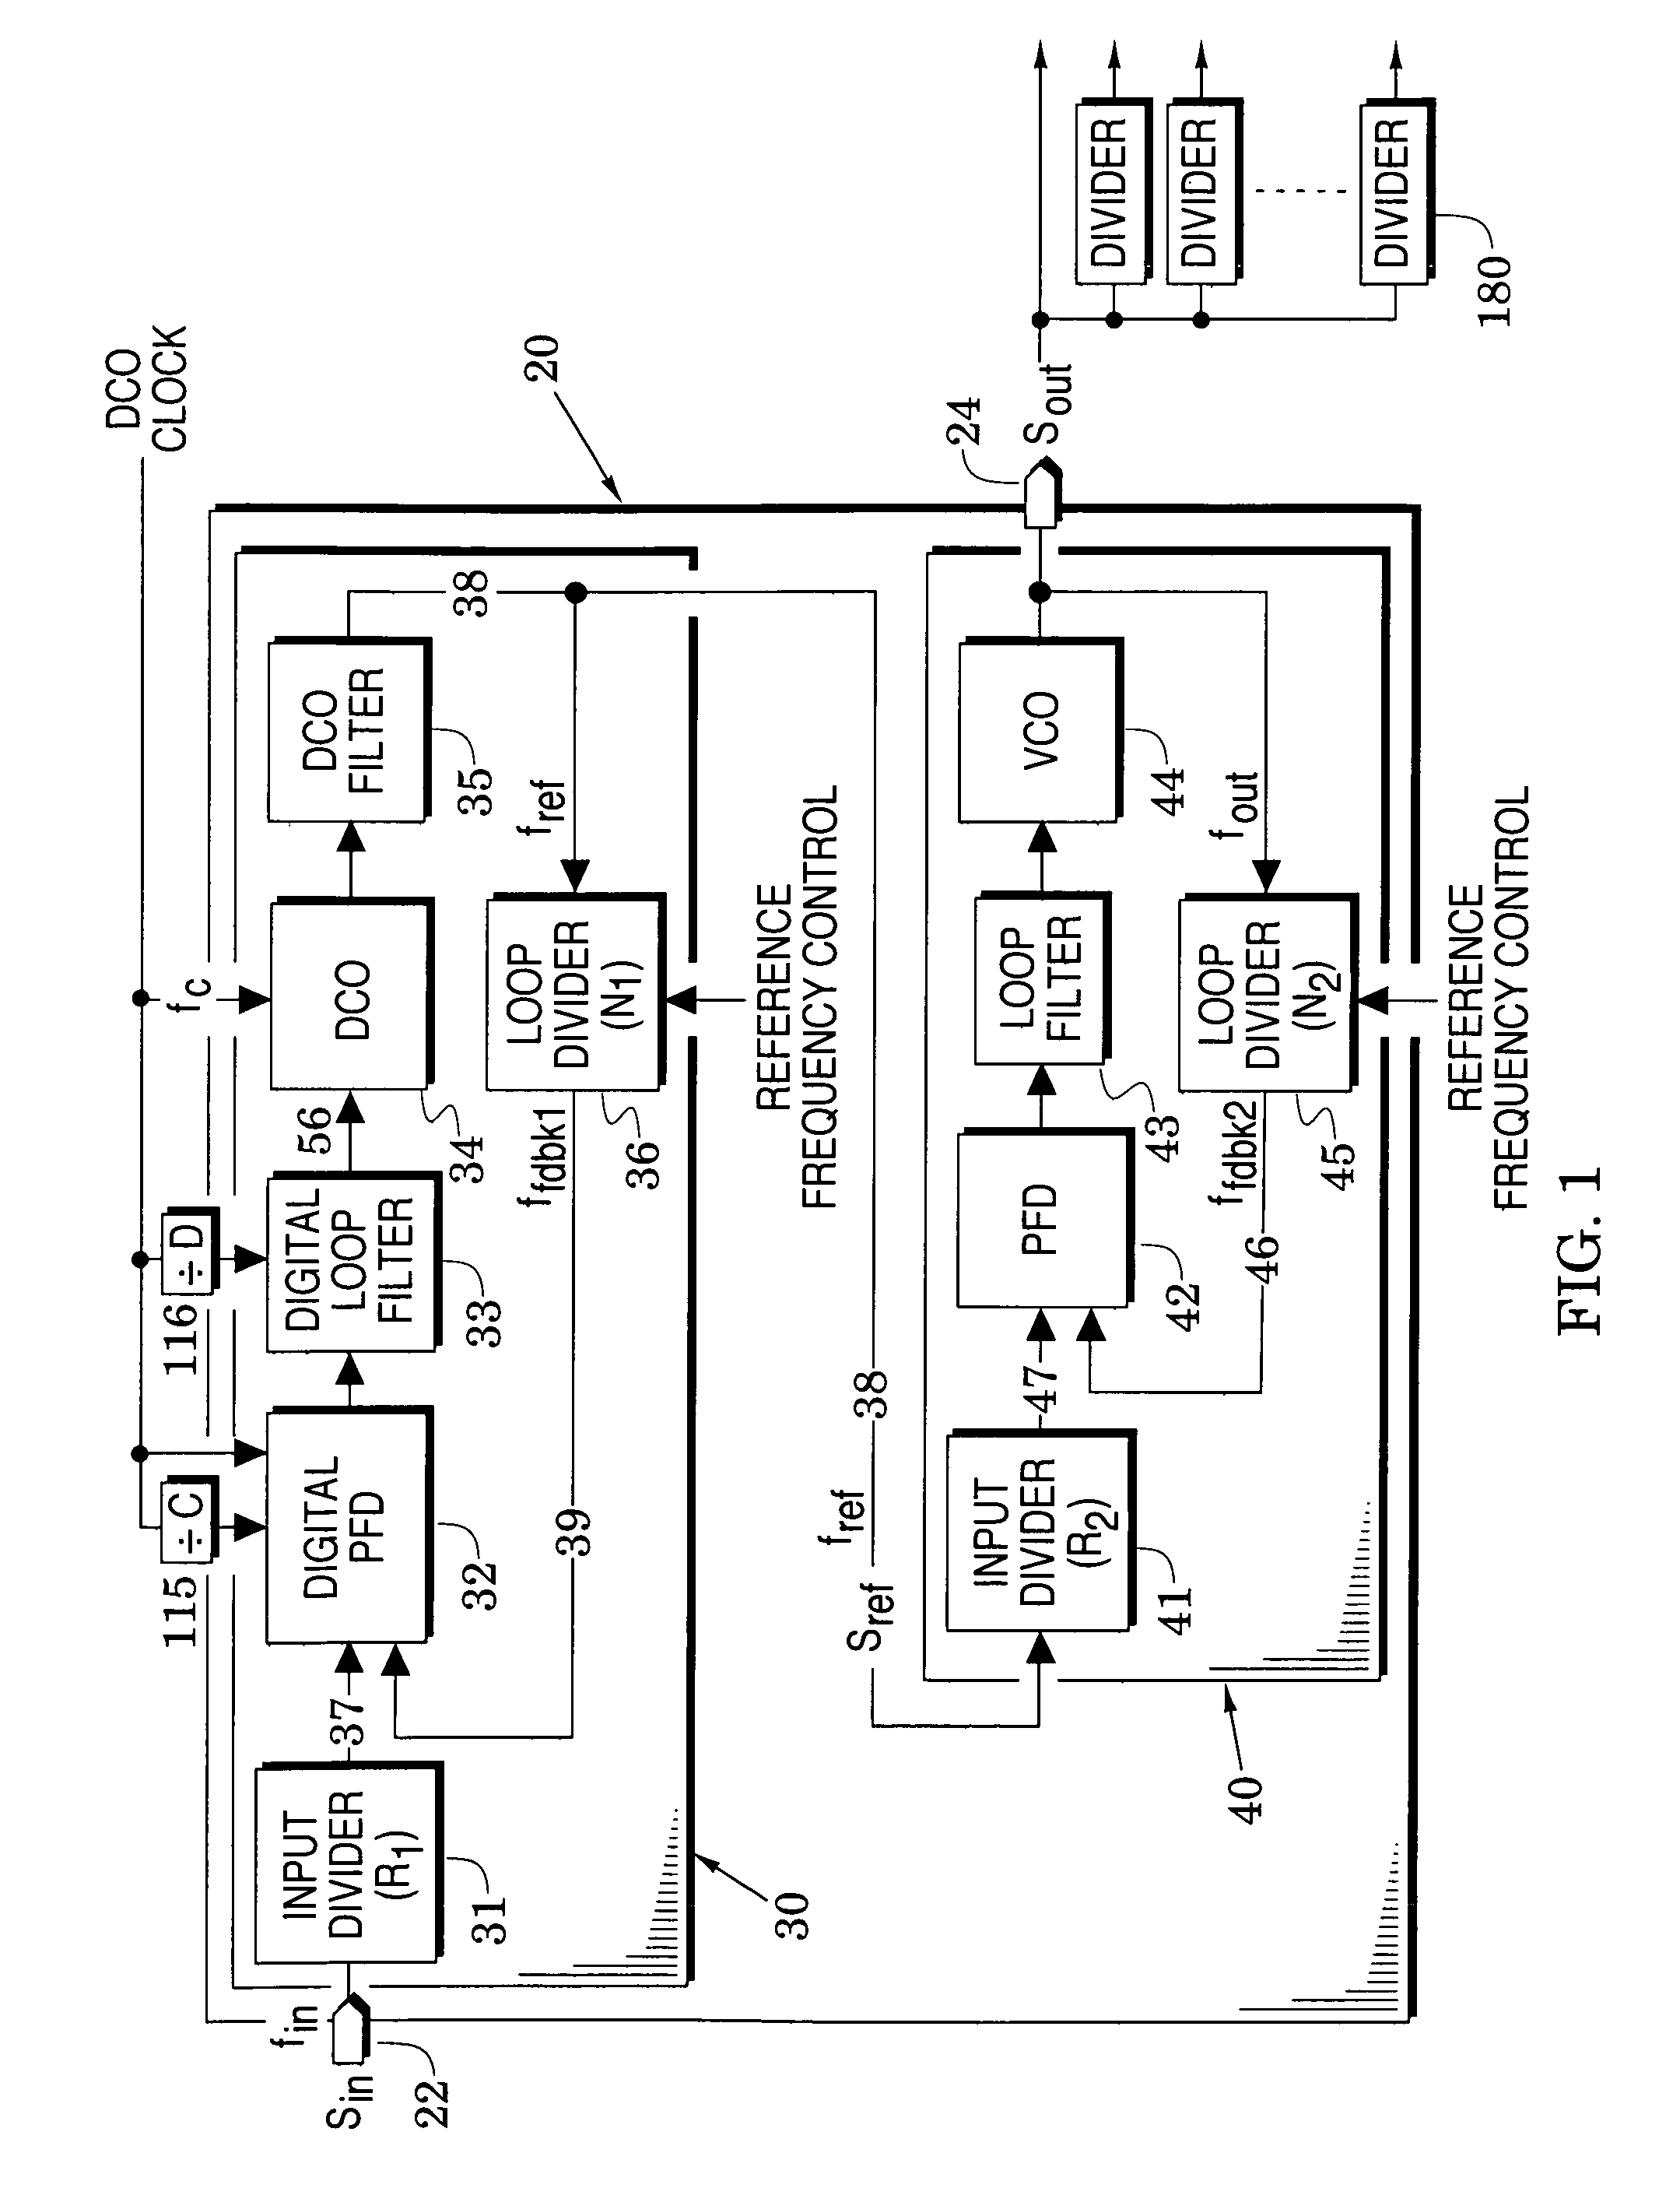 Frequency synthesizers for wireless communication systems